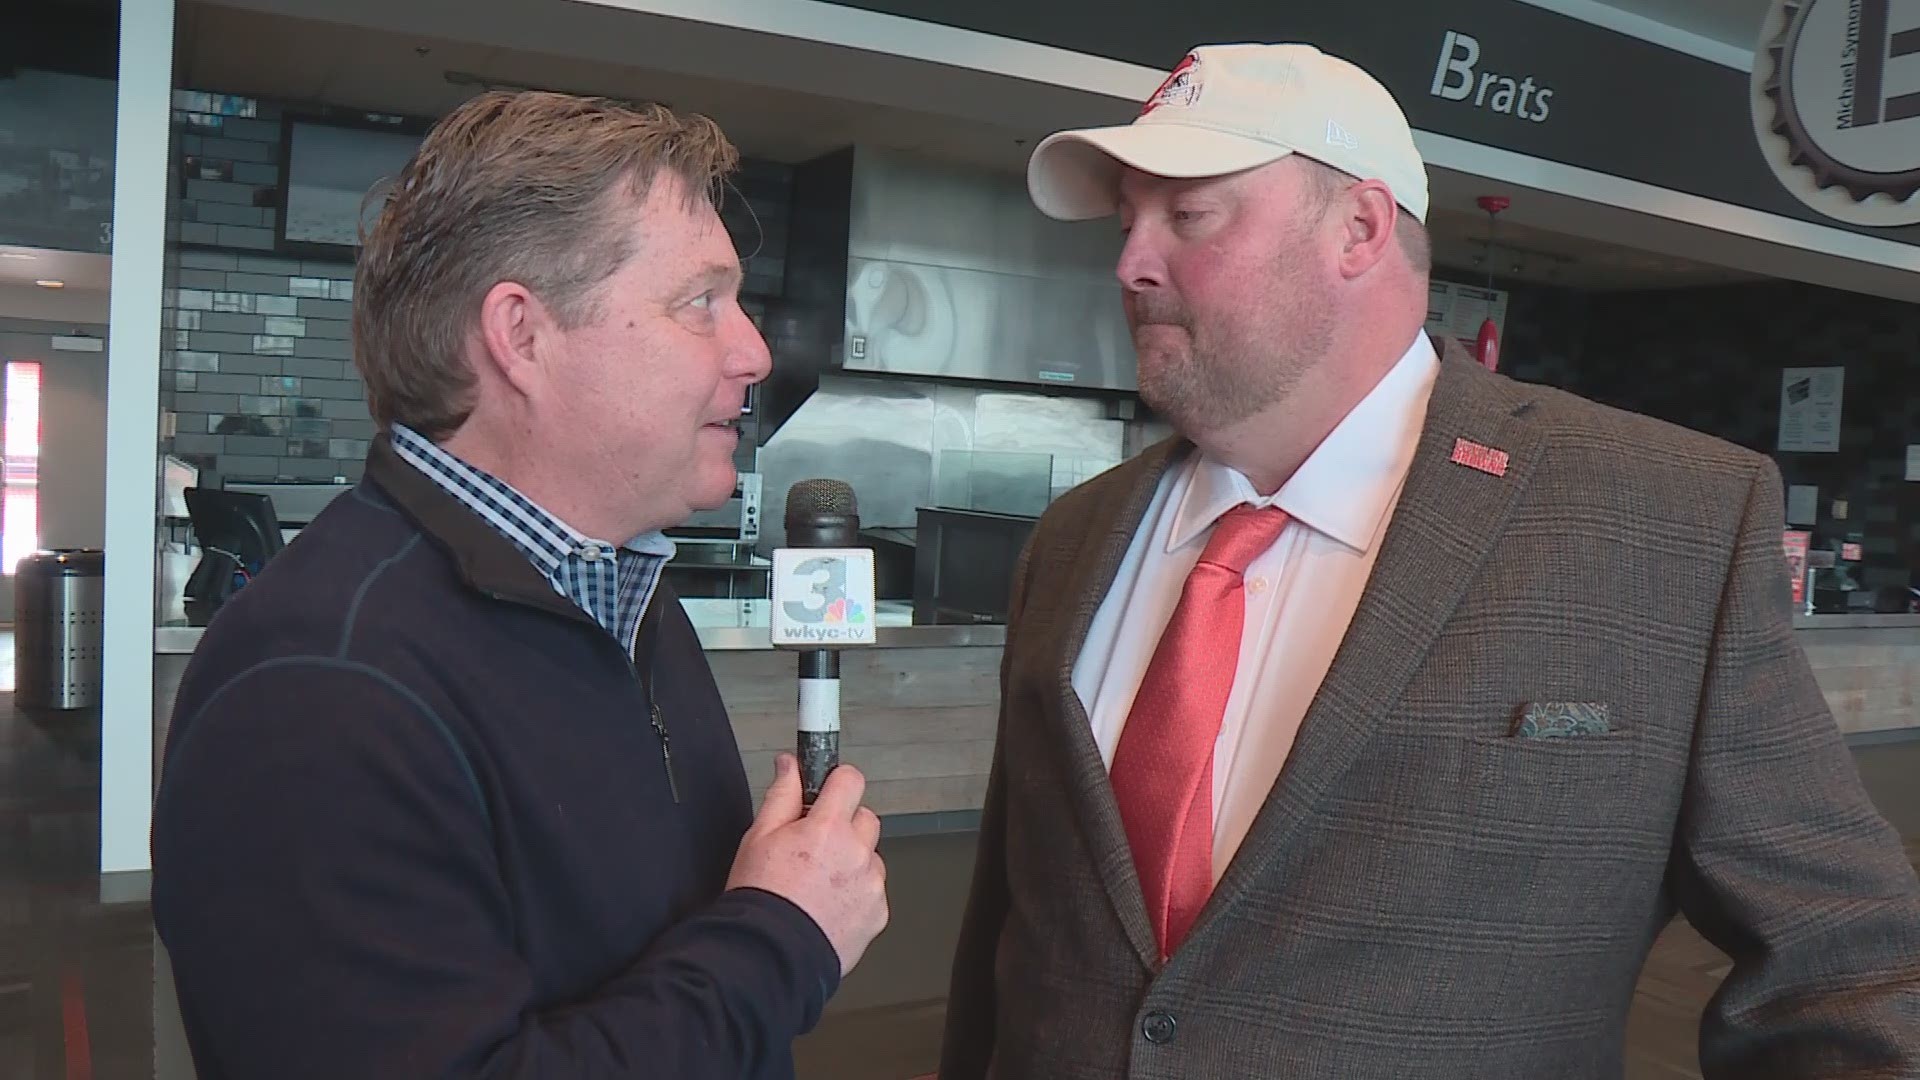 Jim Donovan 1-on-1 interview with new Cleveland Browns head coach Freddie Kitchens